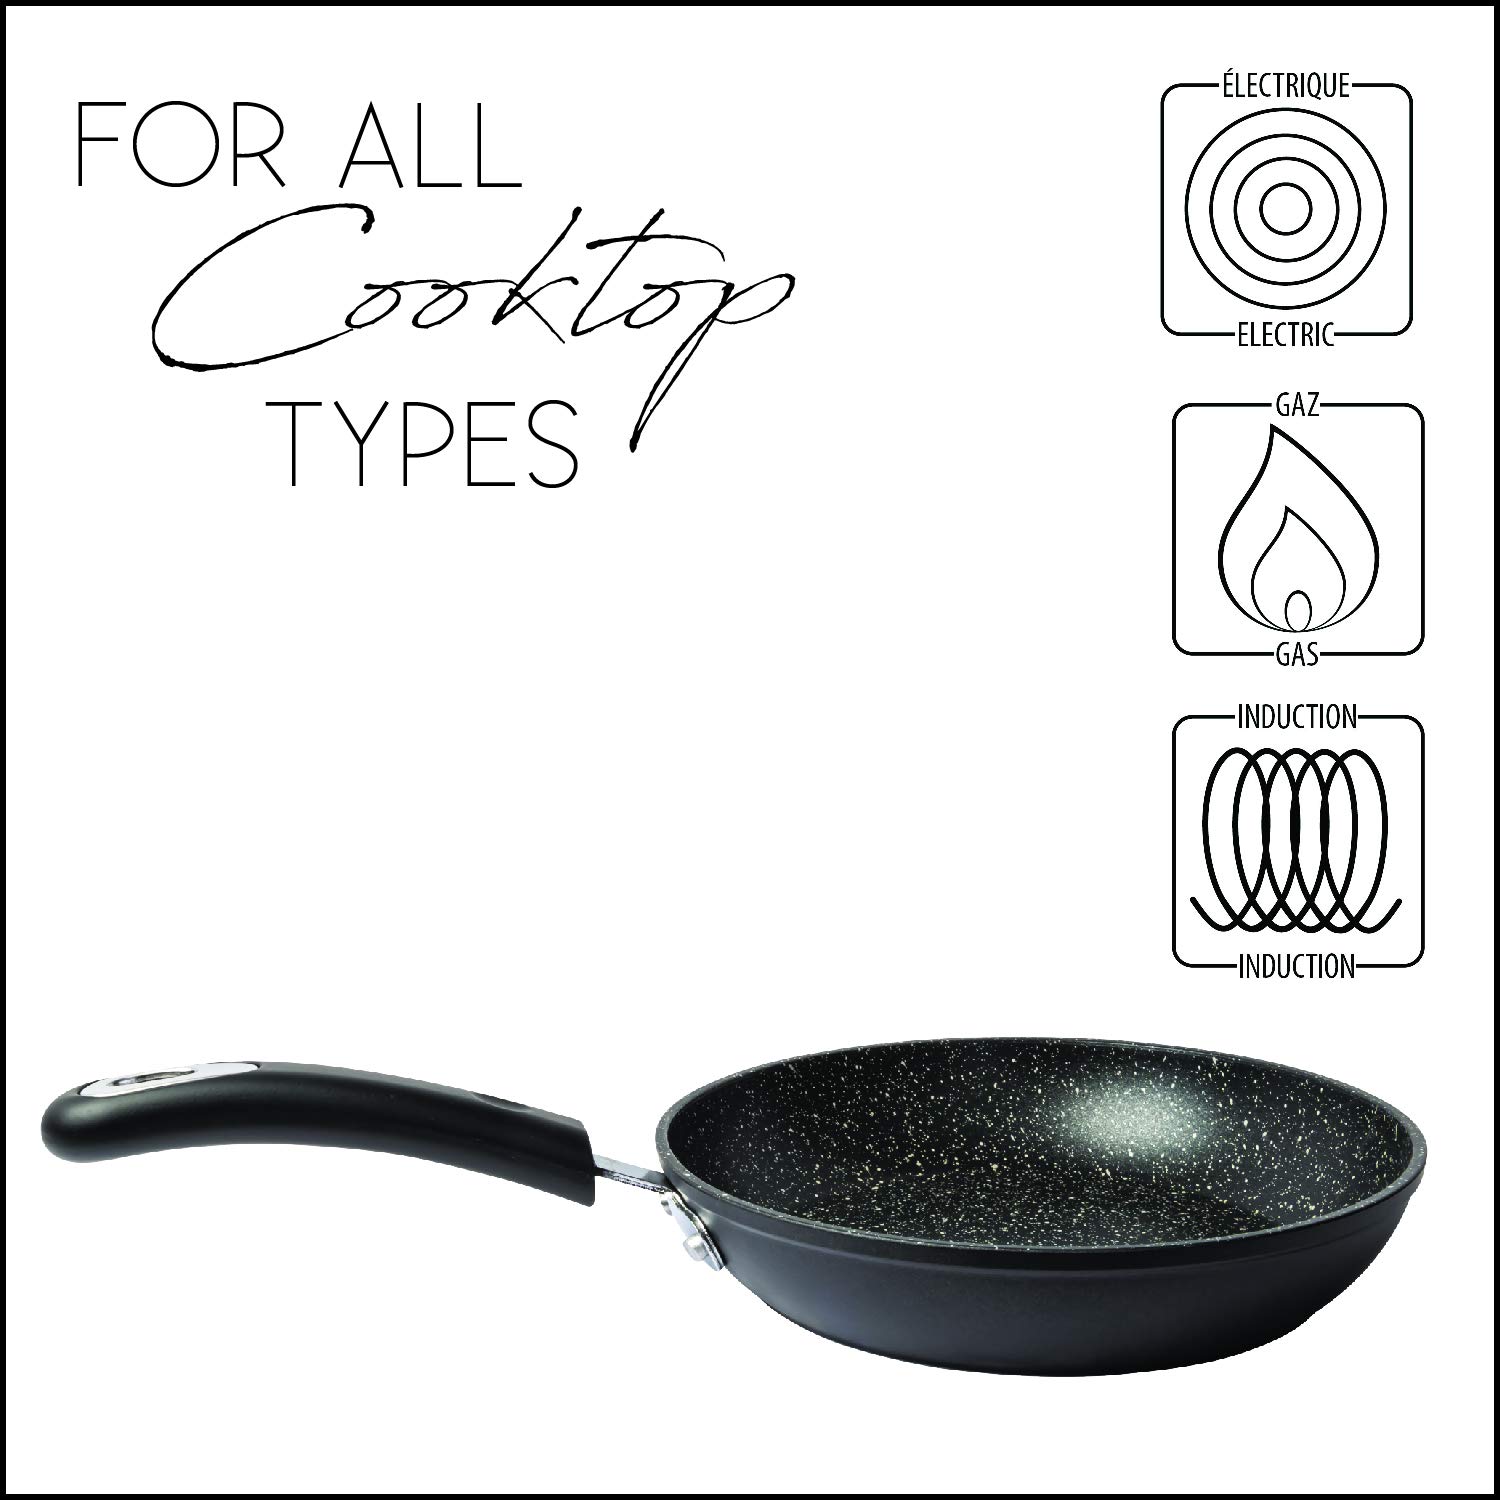 Millvado 11" Nonstick Frying Pan: Large Skillet With Heavy Duty Non Stick Coating - Black Silicone Handle - Induction Compatible Frypans